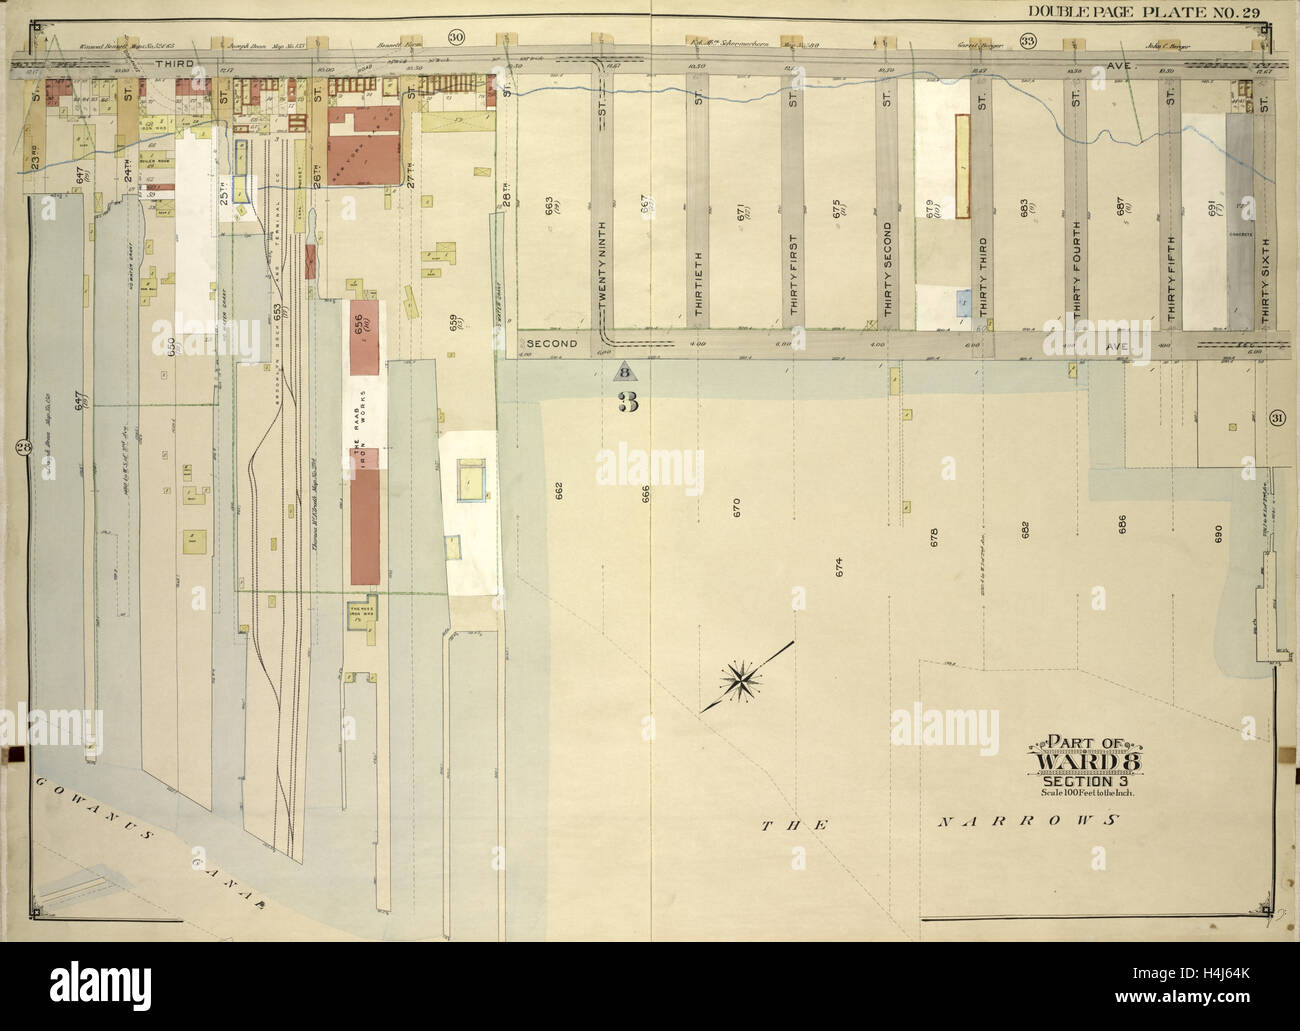 Brooklyn, Vol. 1, Double Page Plate No. 29; Part of Ward 8, Section 3; Map bounded by 3rd Ave., 36th St.; Including2nd Ave. Stock Photo